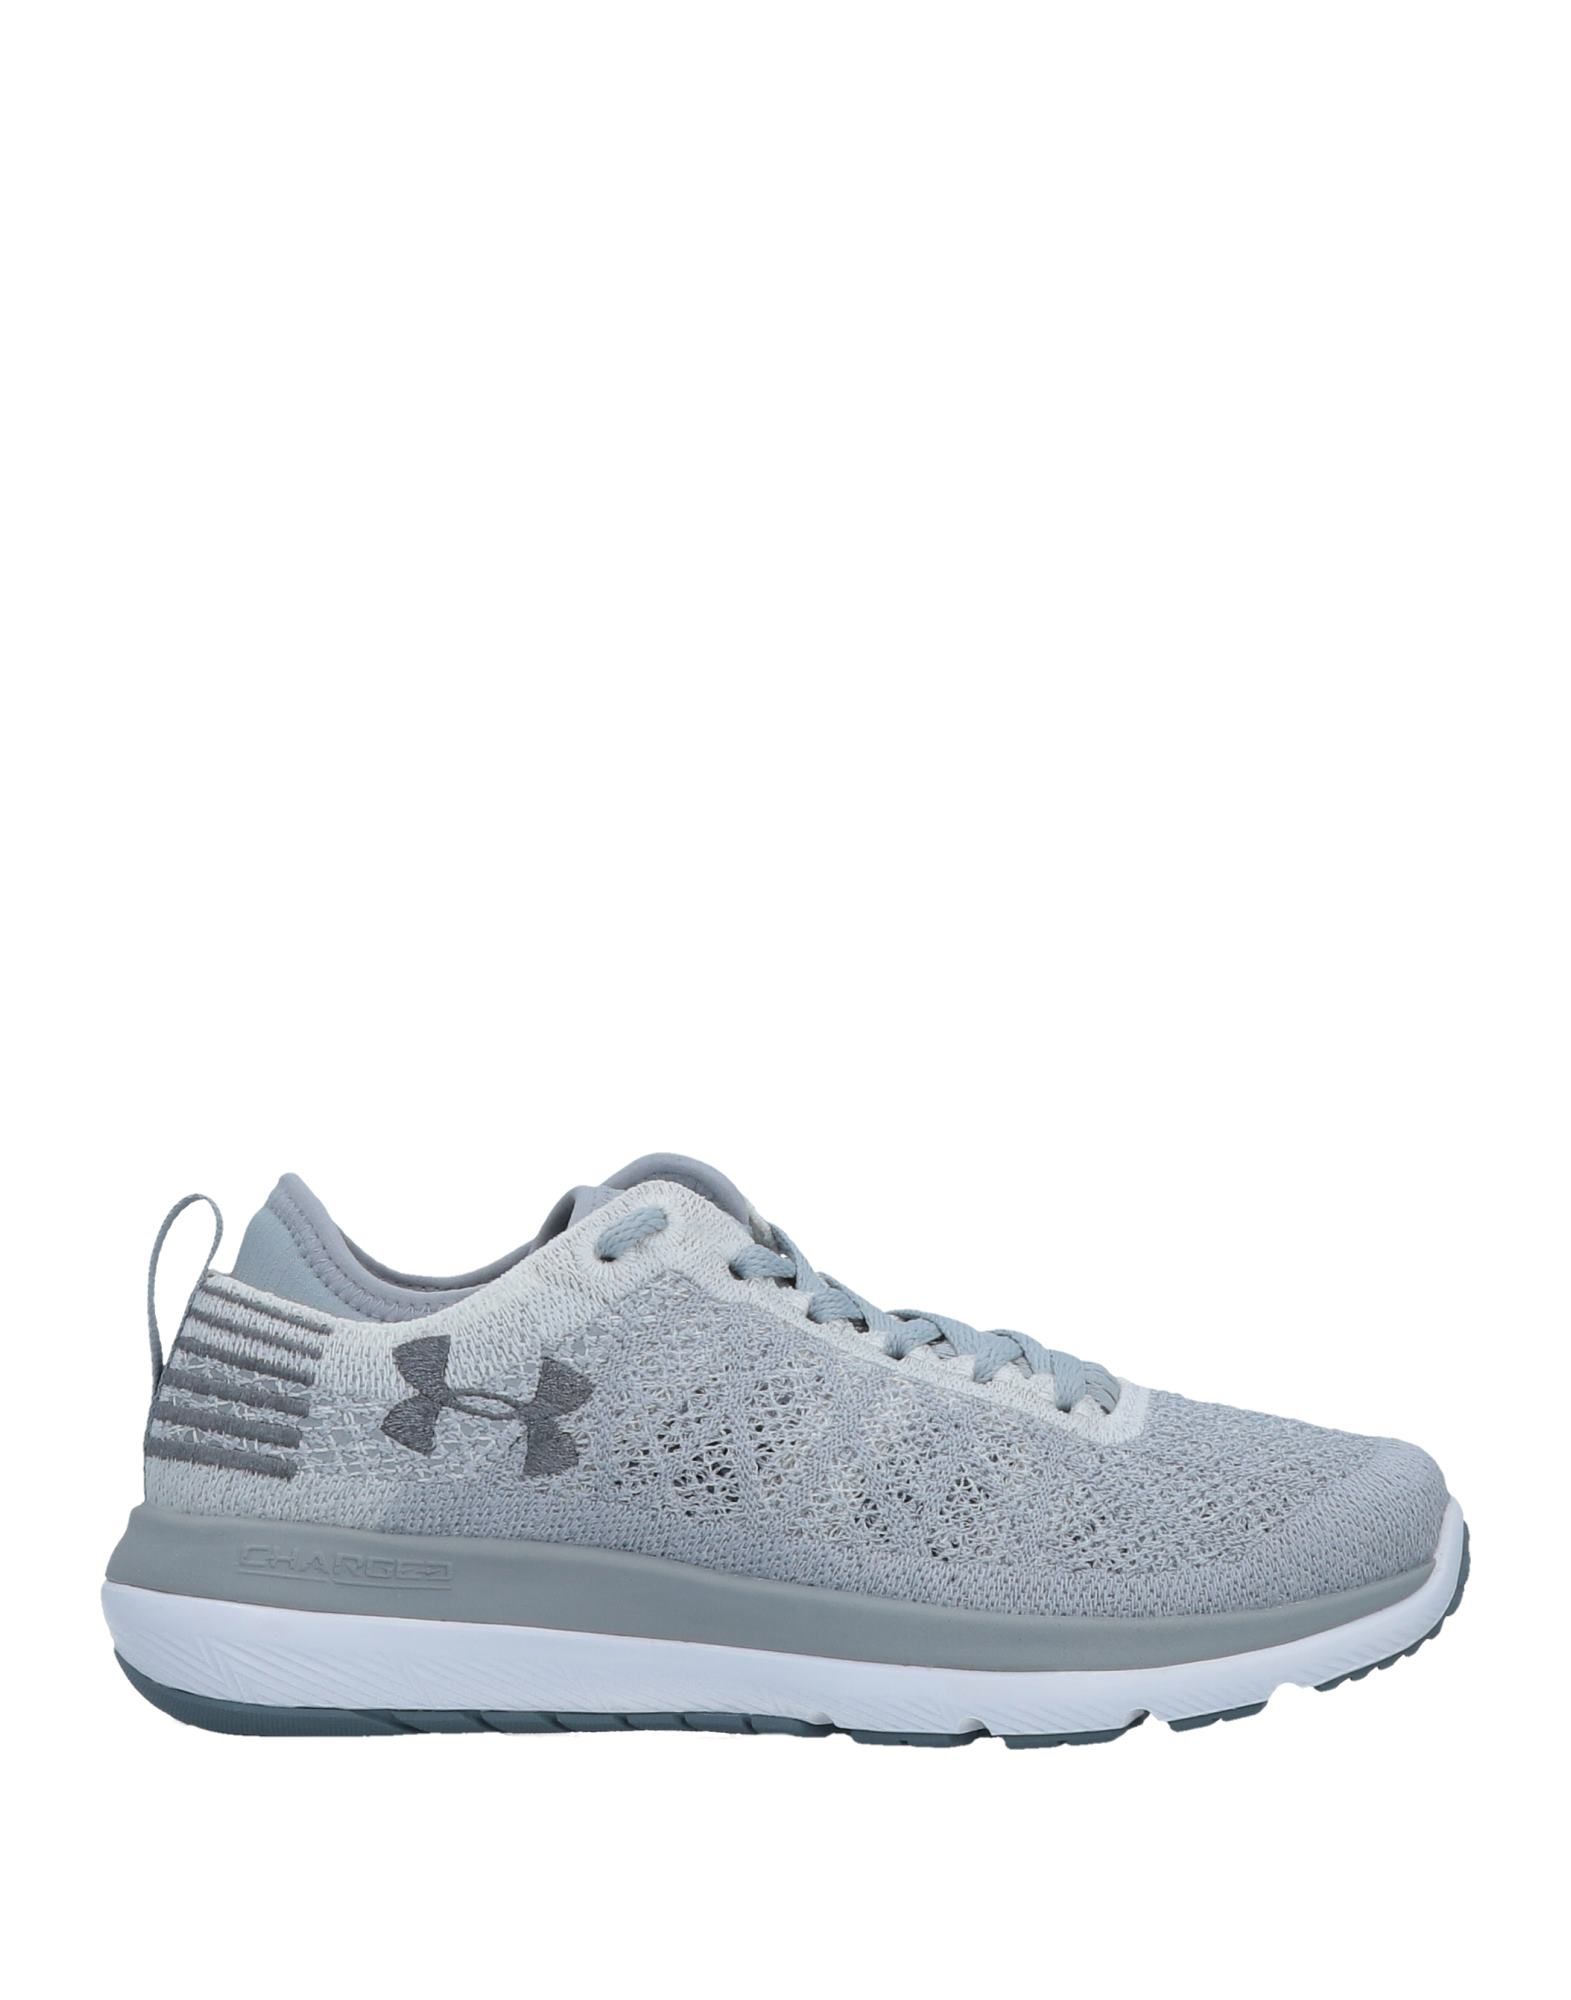 UNDER ARMOUR SNEAKERS,11509108PT 9